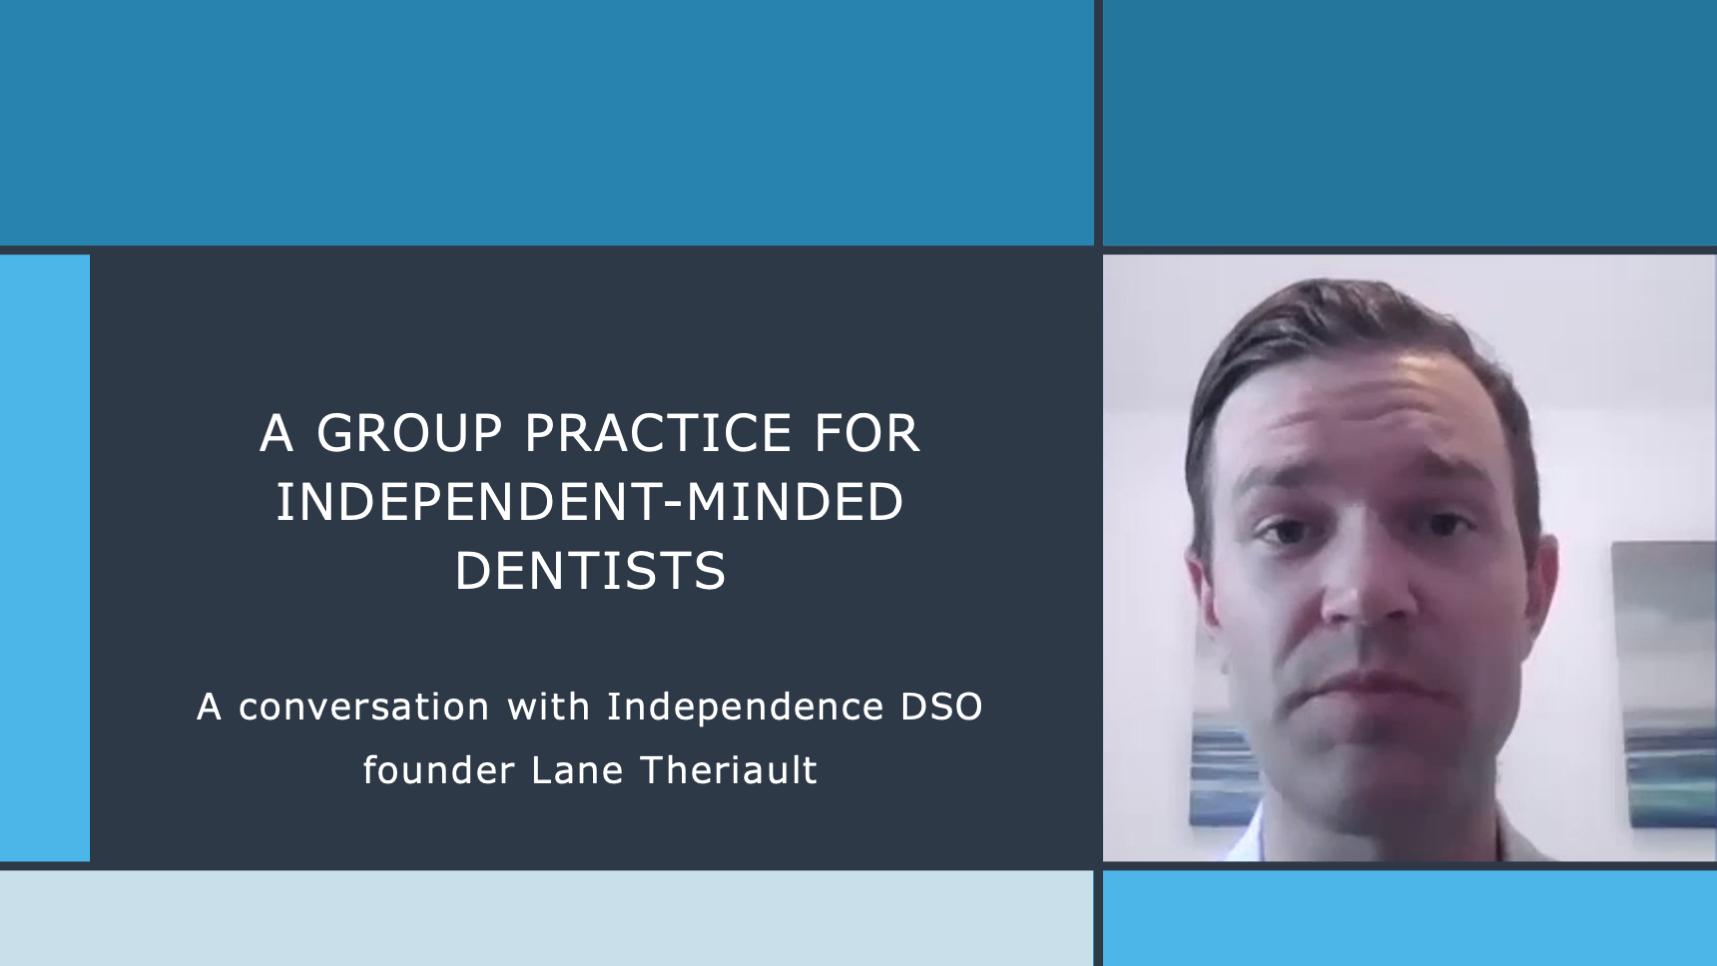 A Group Practice for Independent-Minded Dentists: A conversation with Independence DSO founder Lane Theriault